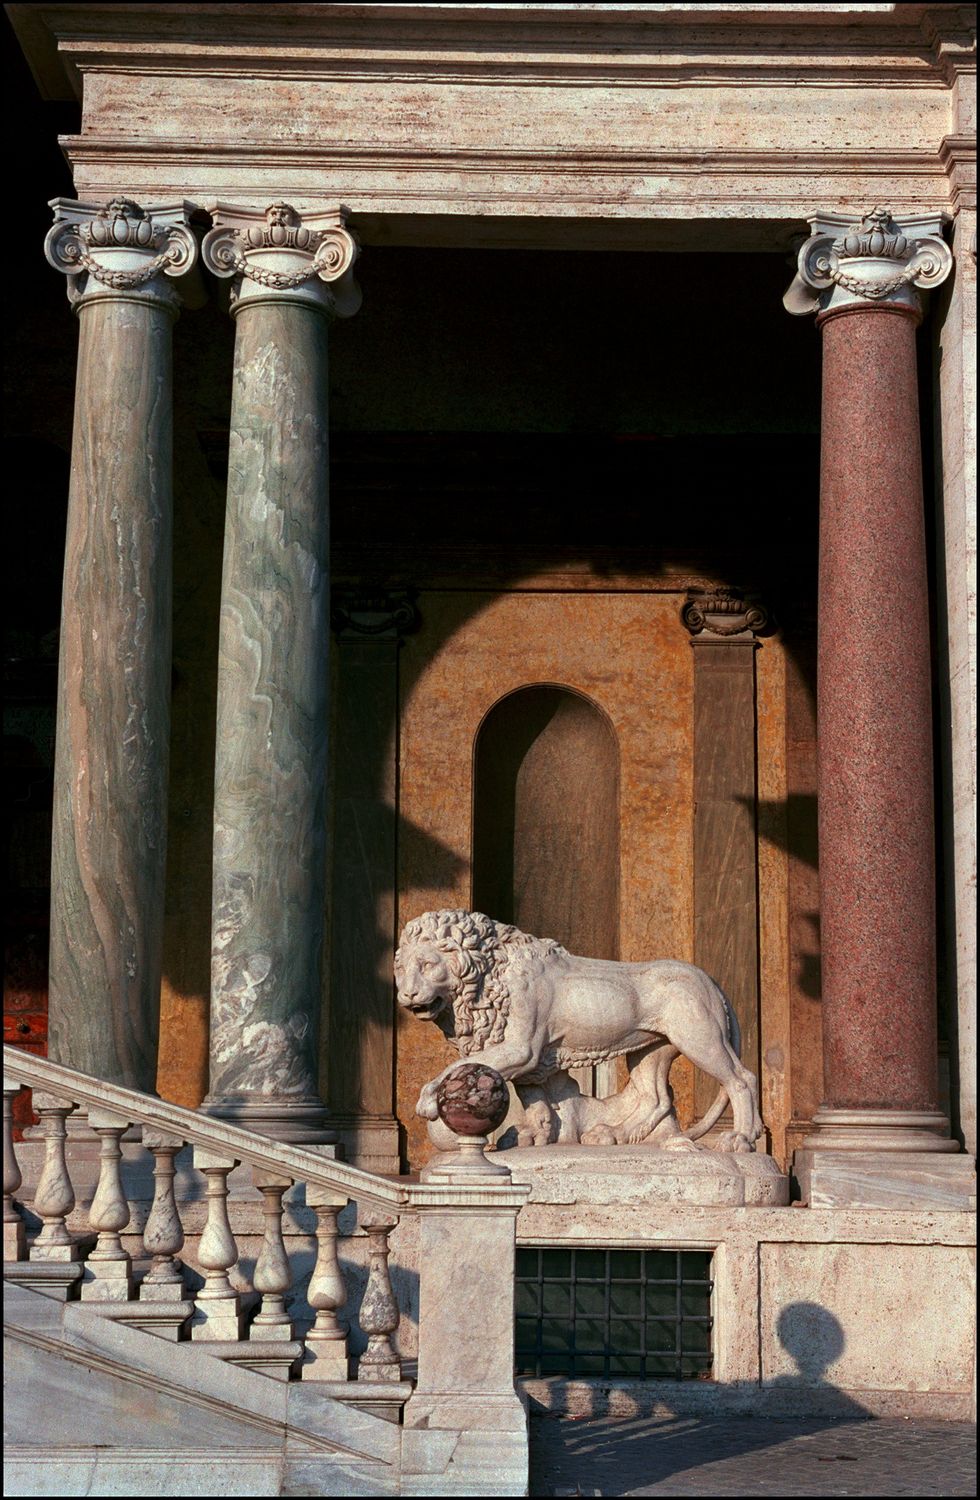 italy   june 12  on the loggia, a 19th century copy of a lion statue   the original is in bargello museum in florence in rome, italy on june 12, 2002  photo by raphael gaillardegamma rapho via getty images